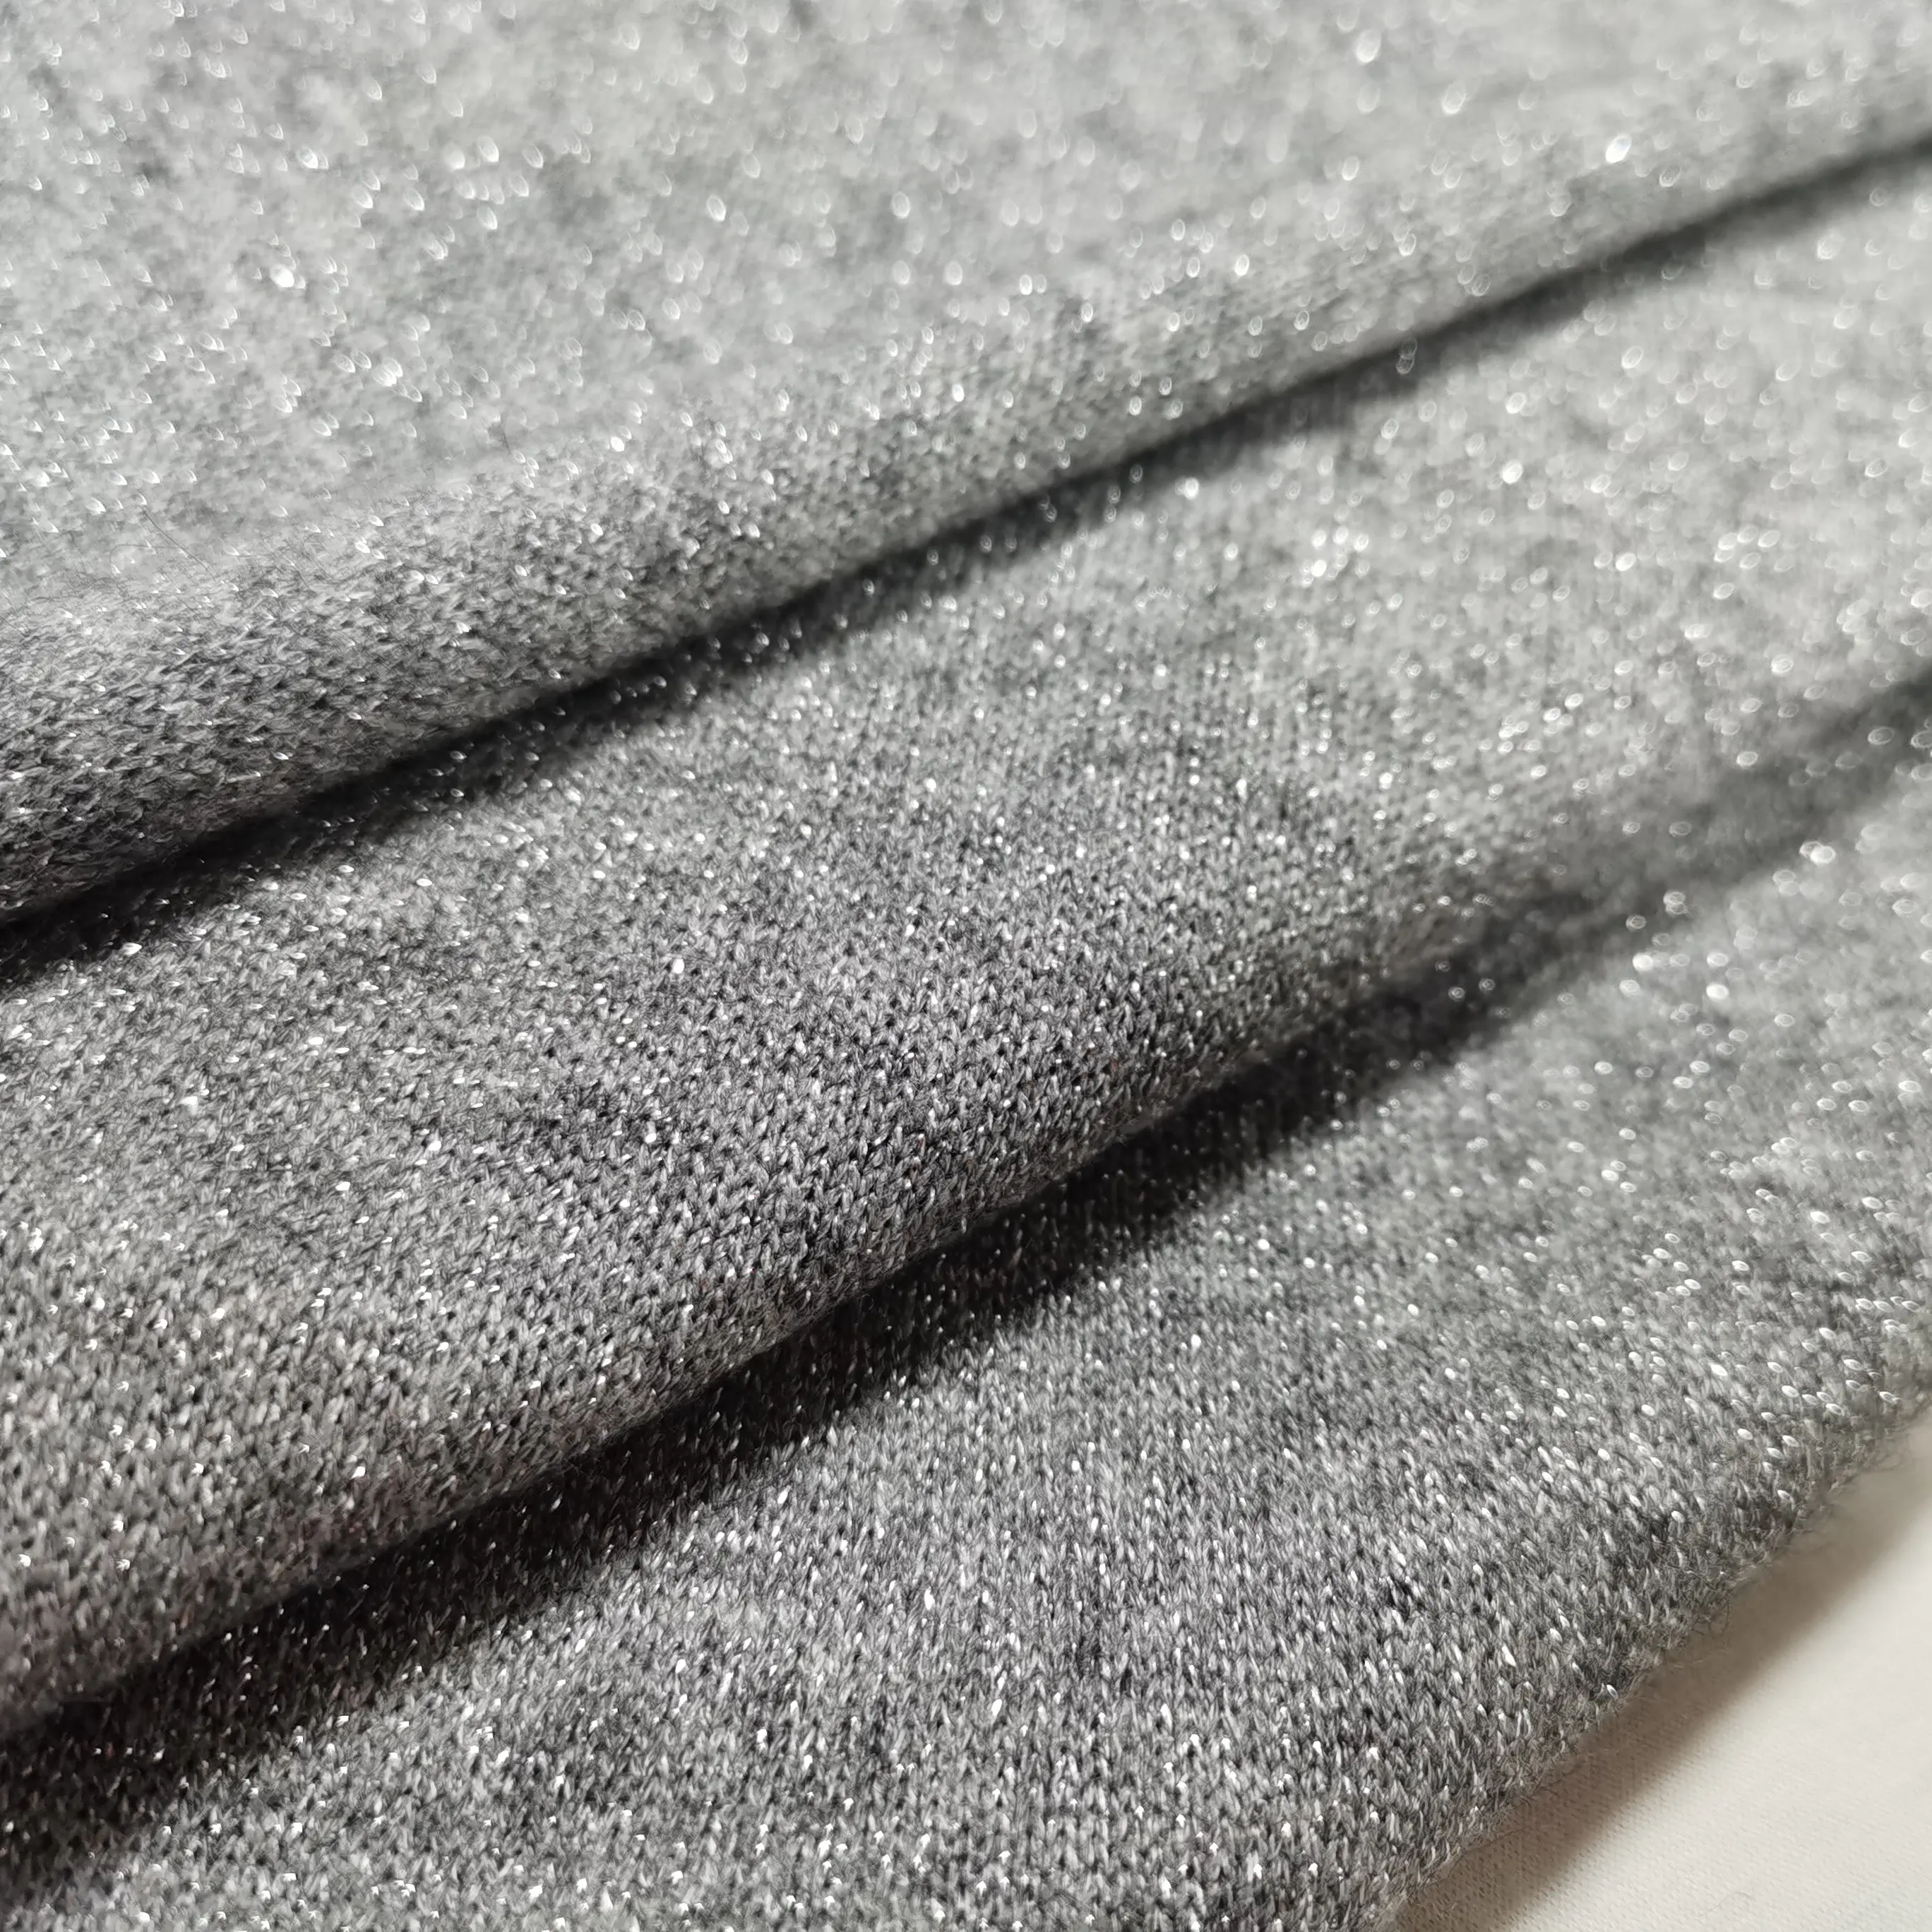 5G Cashmere Knitted Fabric Hacci Can Be Used For Women's Cashmere Suits And Pants The Fabric Is Very Comfortable And Casual